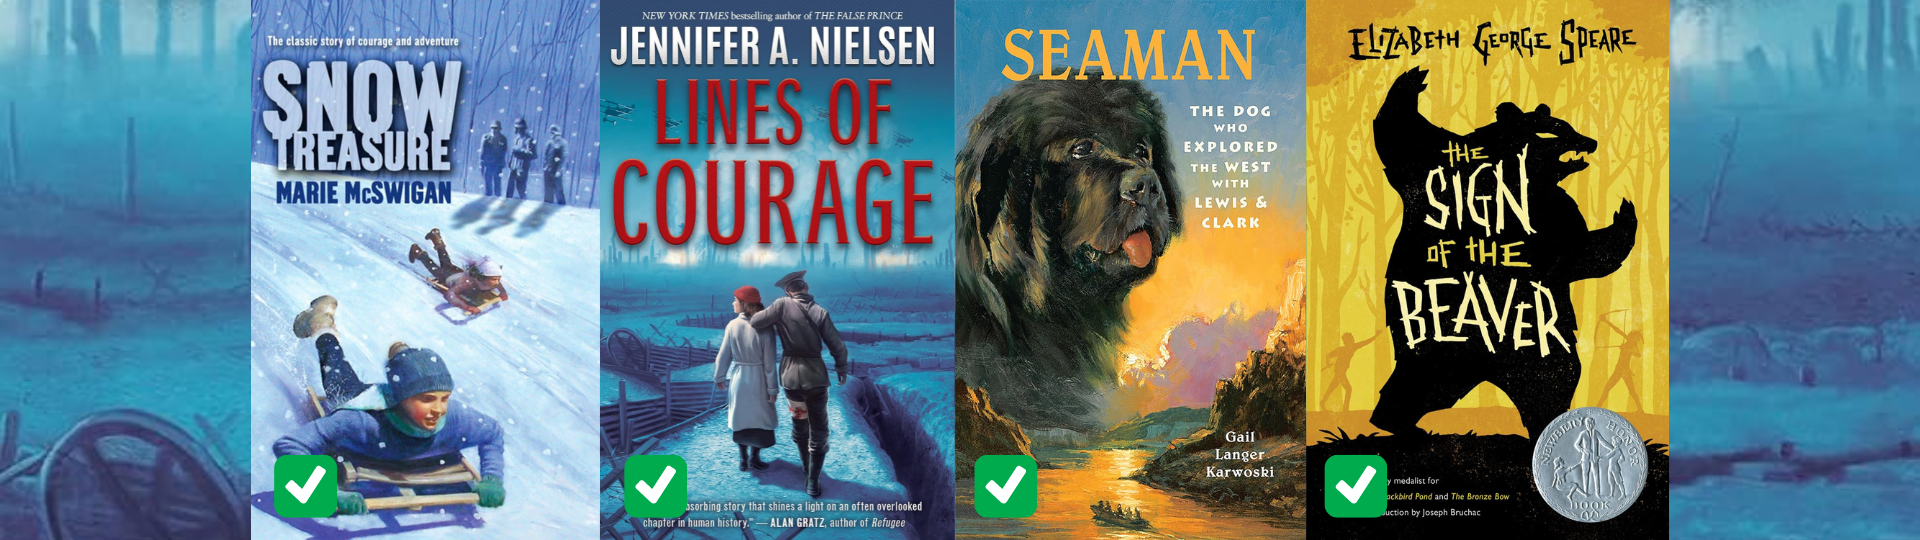 Snow Treasure - Lines of Courage - Seaman: The Dog who Explored the West with Lewis & Clark - The Sign of the Beaver - Approved wholesome chapter books for kids - Big Sky Life Books